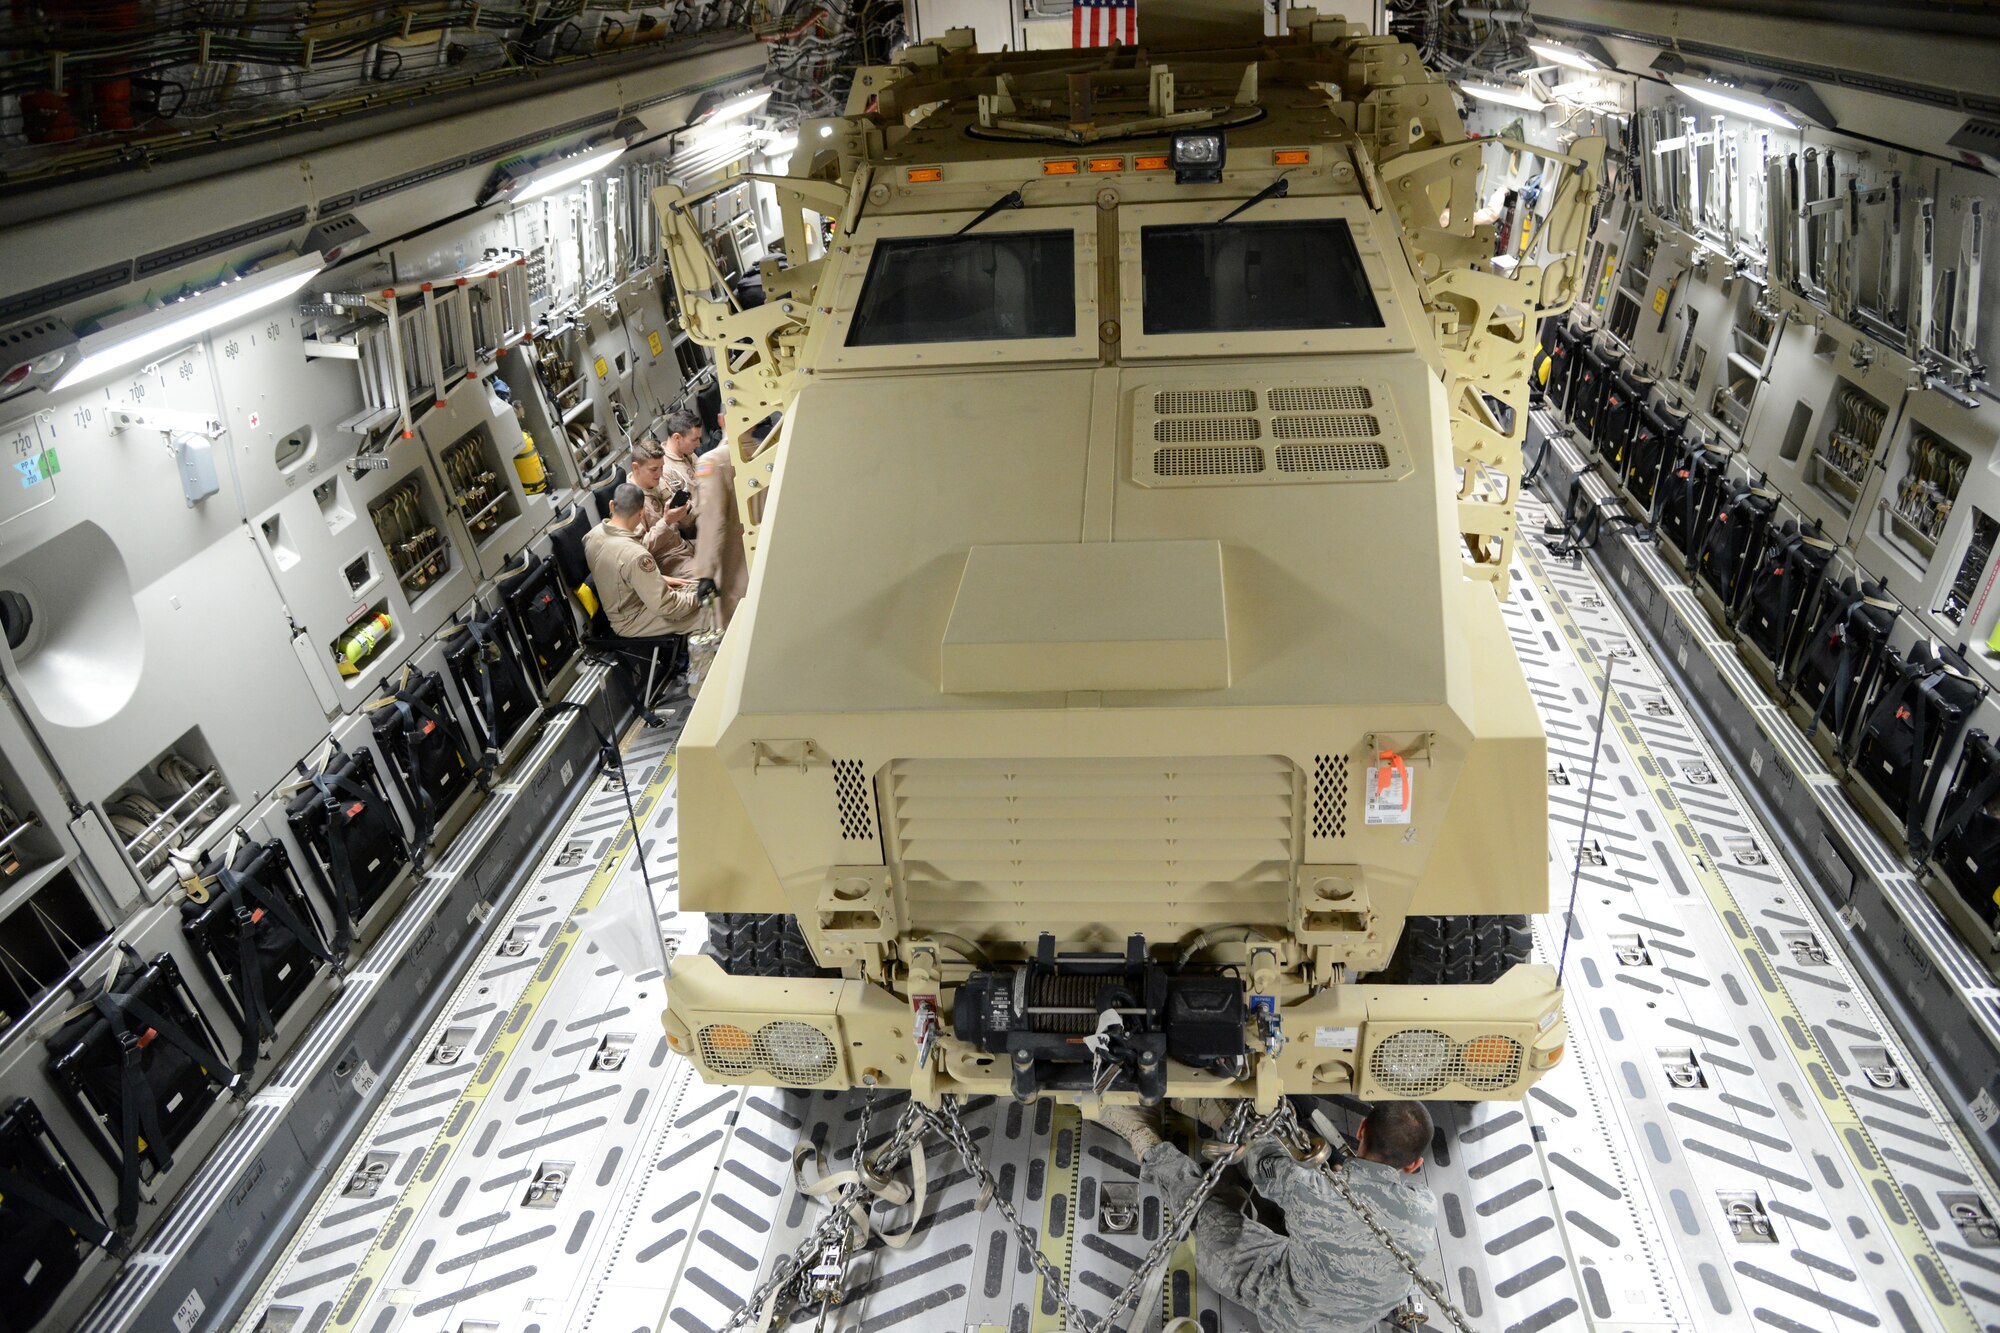 Airmen from the 386th Expeditionary Operations Group and the 386th Expeditionary Readiness Logistics Squadron, load two Mine Resistant Armored Personnel carriers on a C-17 Globemaster III bound for Erbil, Iraq, Dec. 30, 2014. The MRAPs are for the Iraqi Security Forces and Peshmerga to aid in the fight against Daish. (U.S. Air Force photo by Tech. Sgt. Jared Marquis/released)